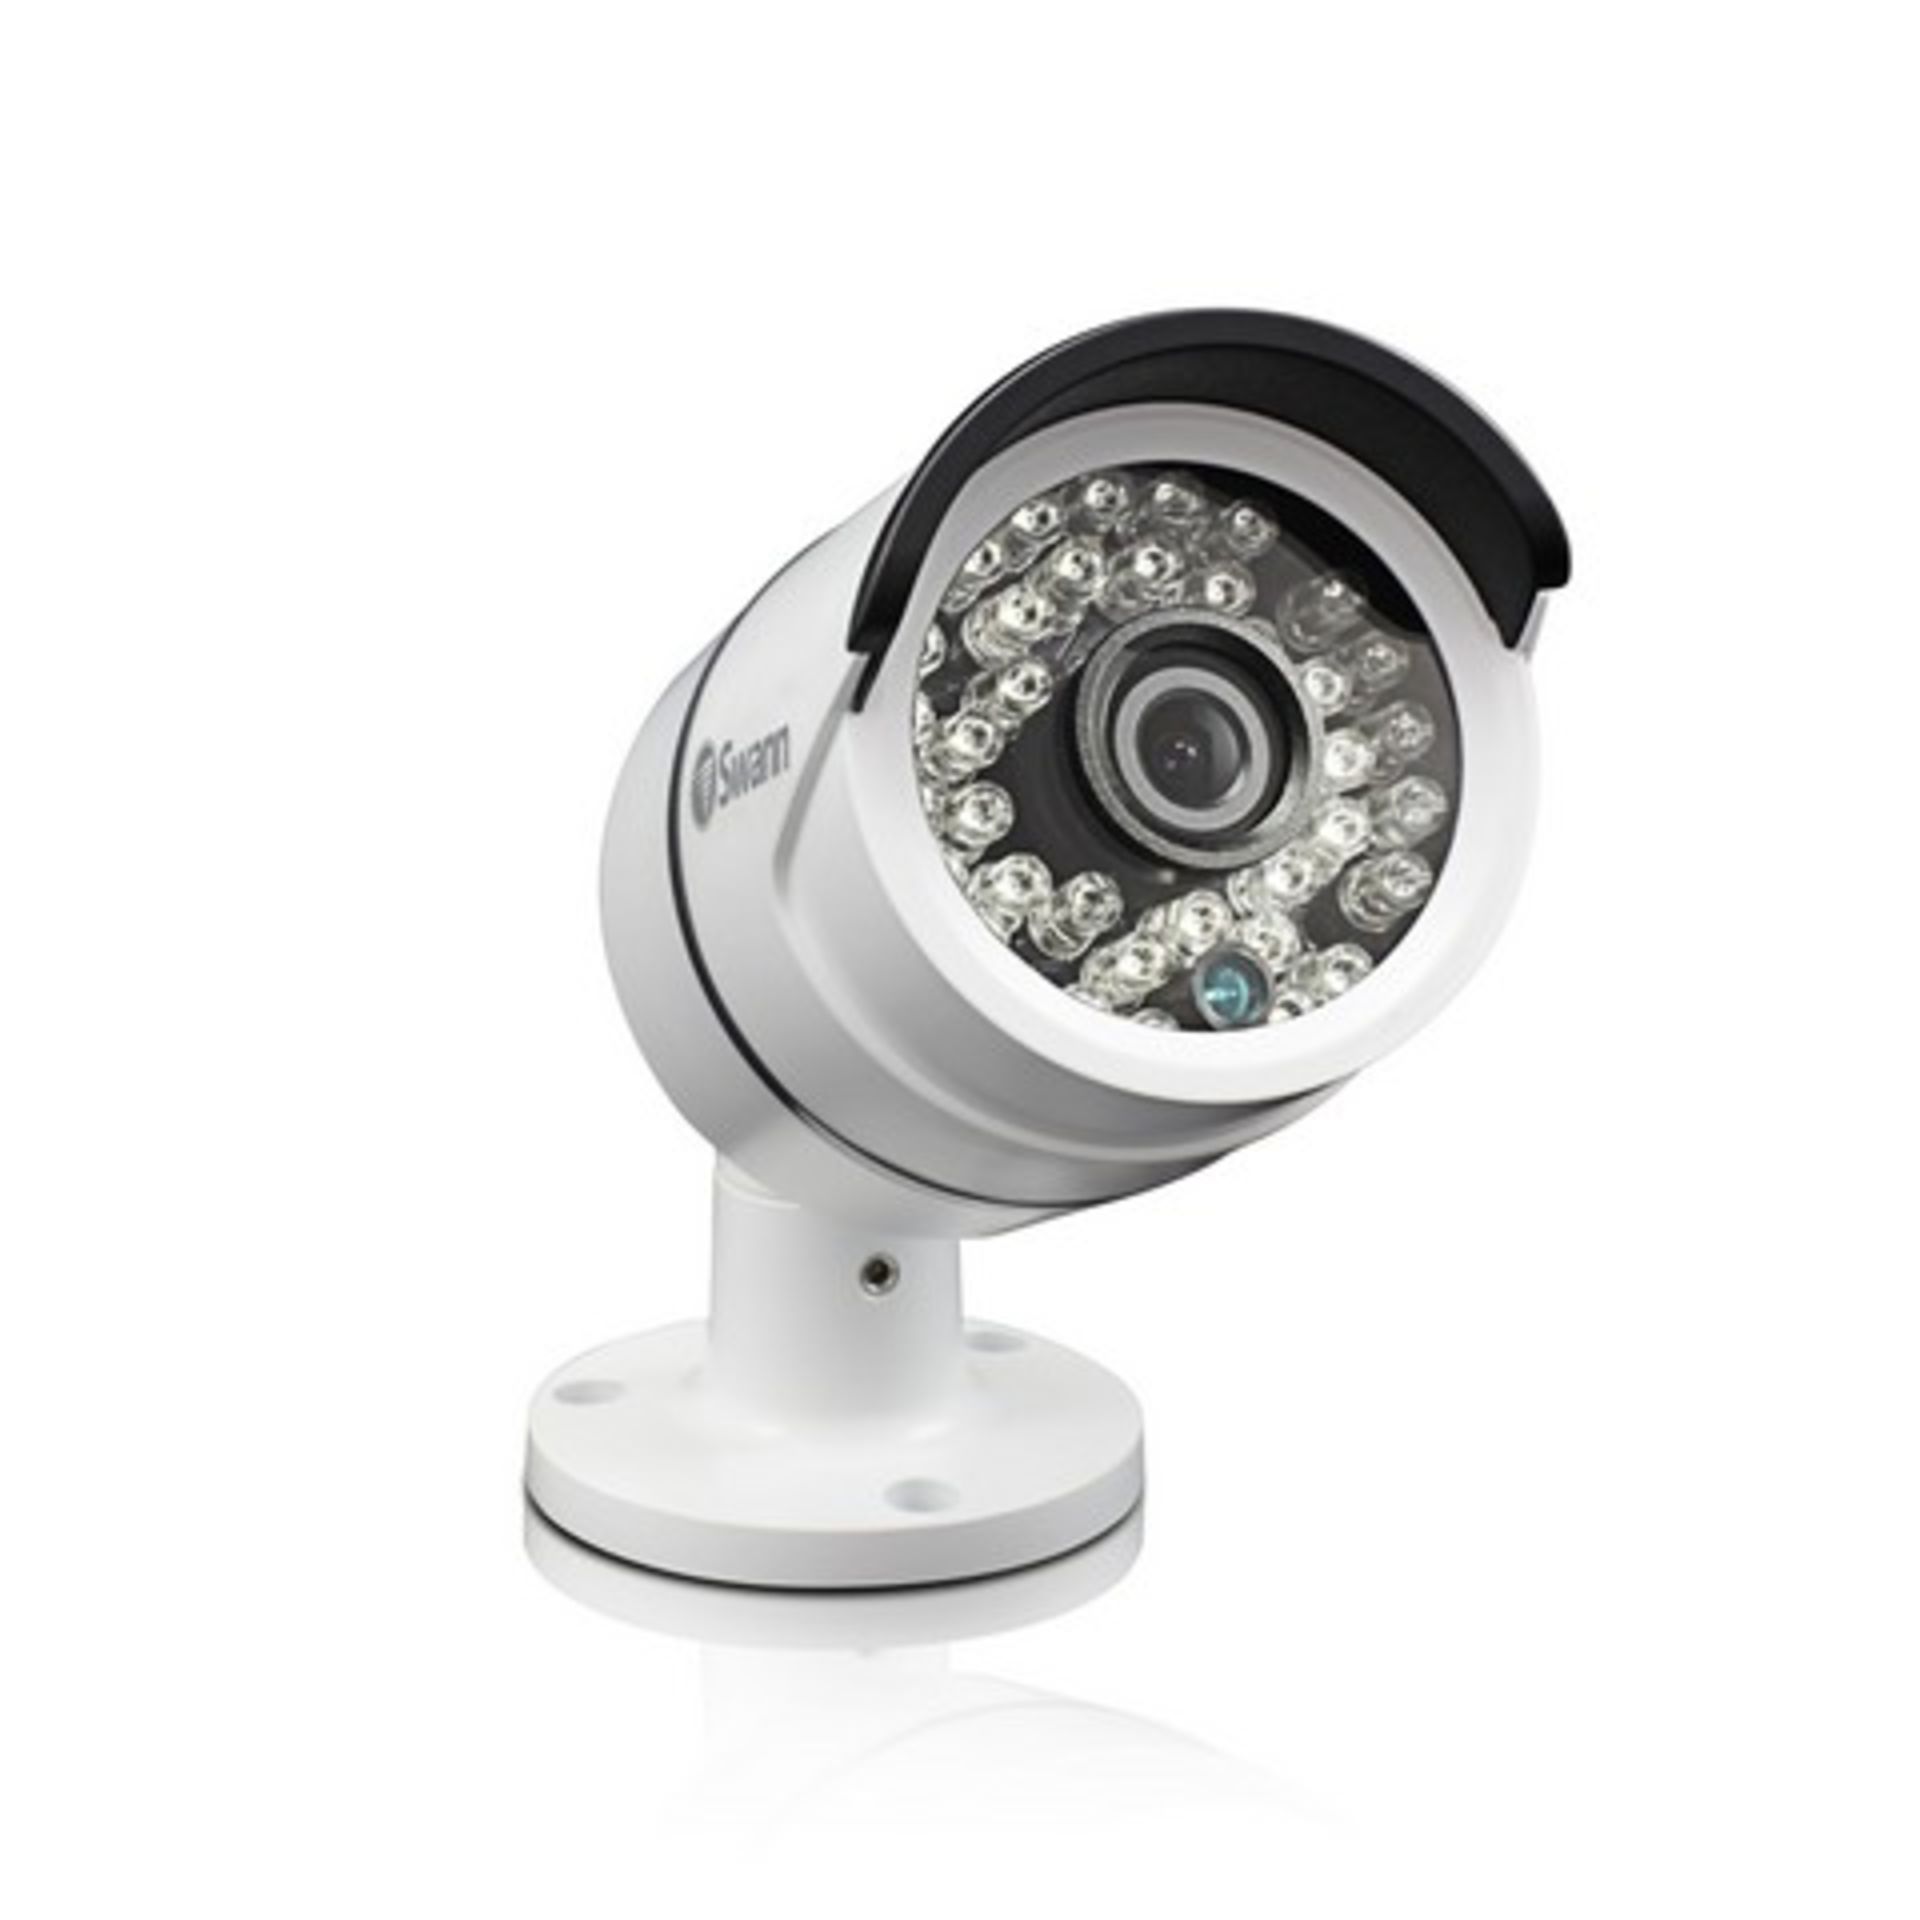 V Grade A Swann Pro H855 Professional Full HD Security Camera - 1080p - 30 Meter Night Vision